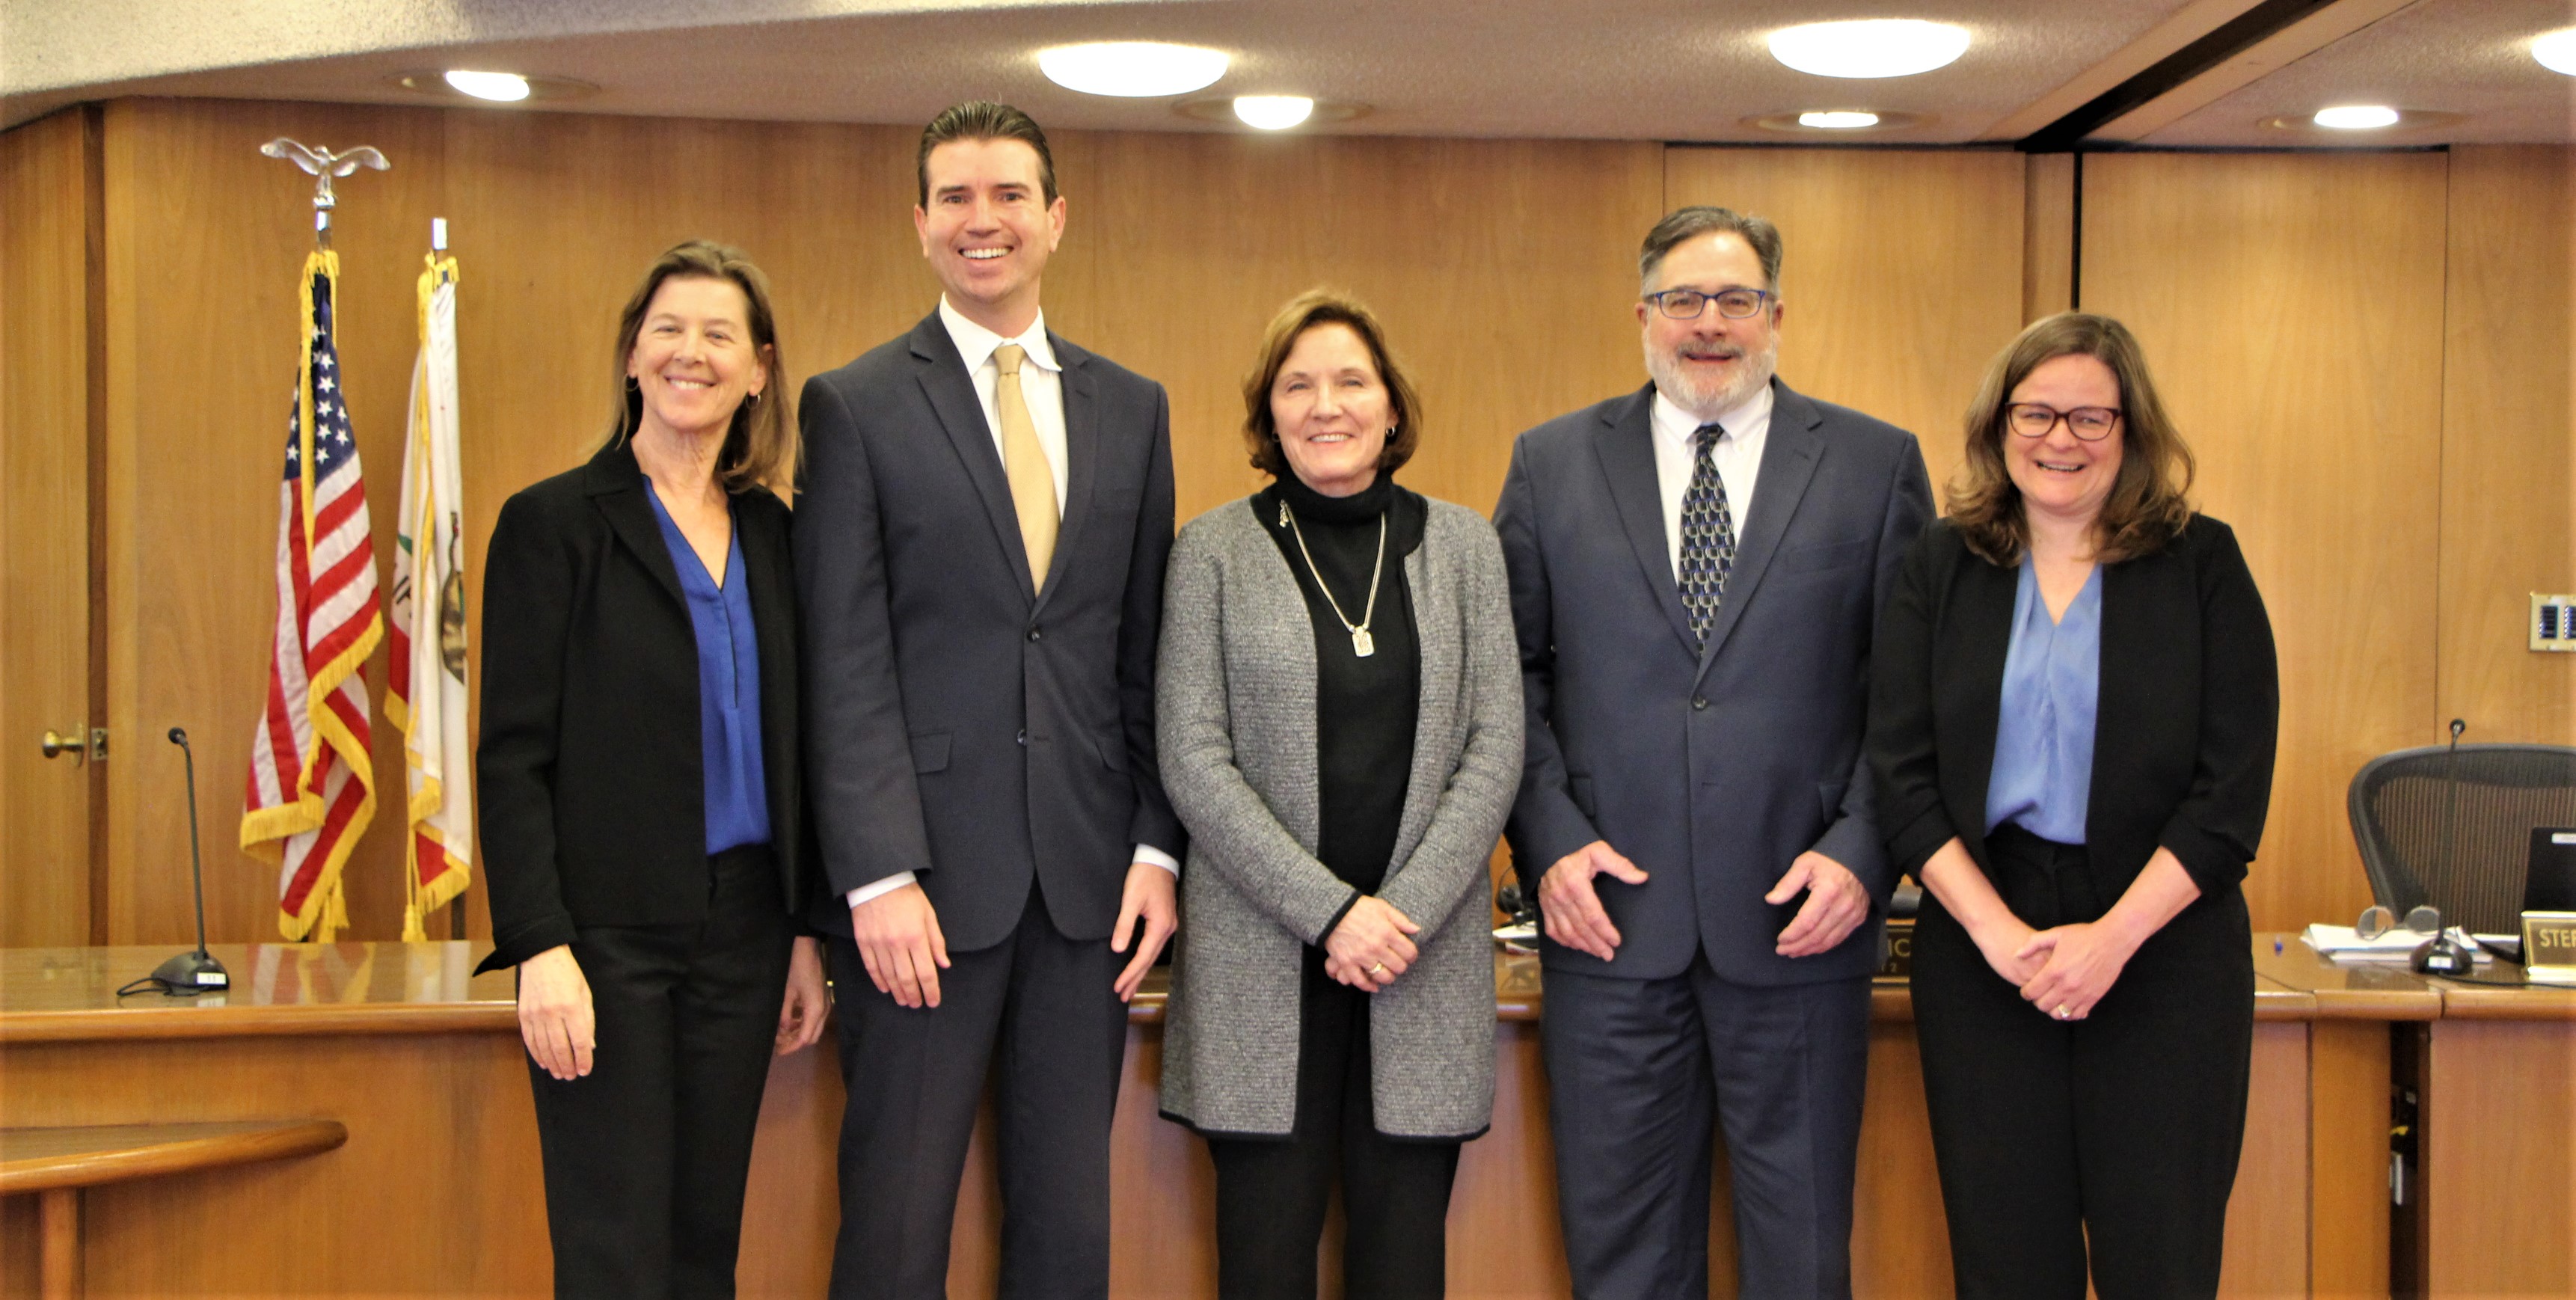 Marin County Supervisors stand shoulder to shoulder. From left are Katie Rice, Eric Lucan, Stephanie Moulton-Peters, Dennis Rodoni, and Mary Sackett